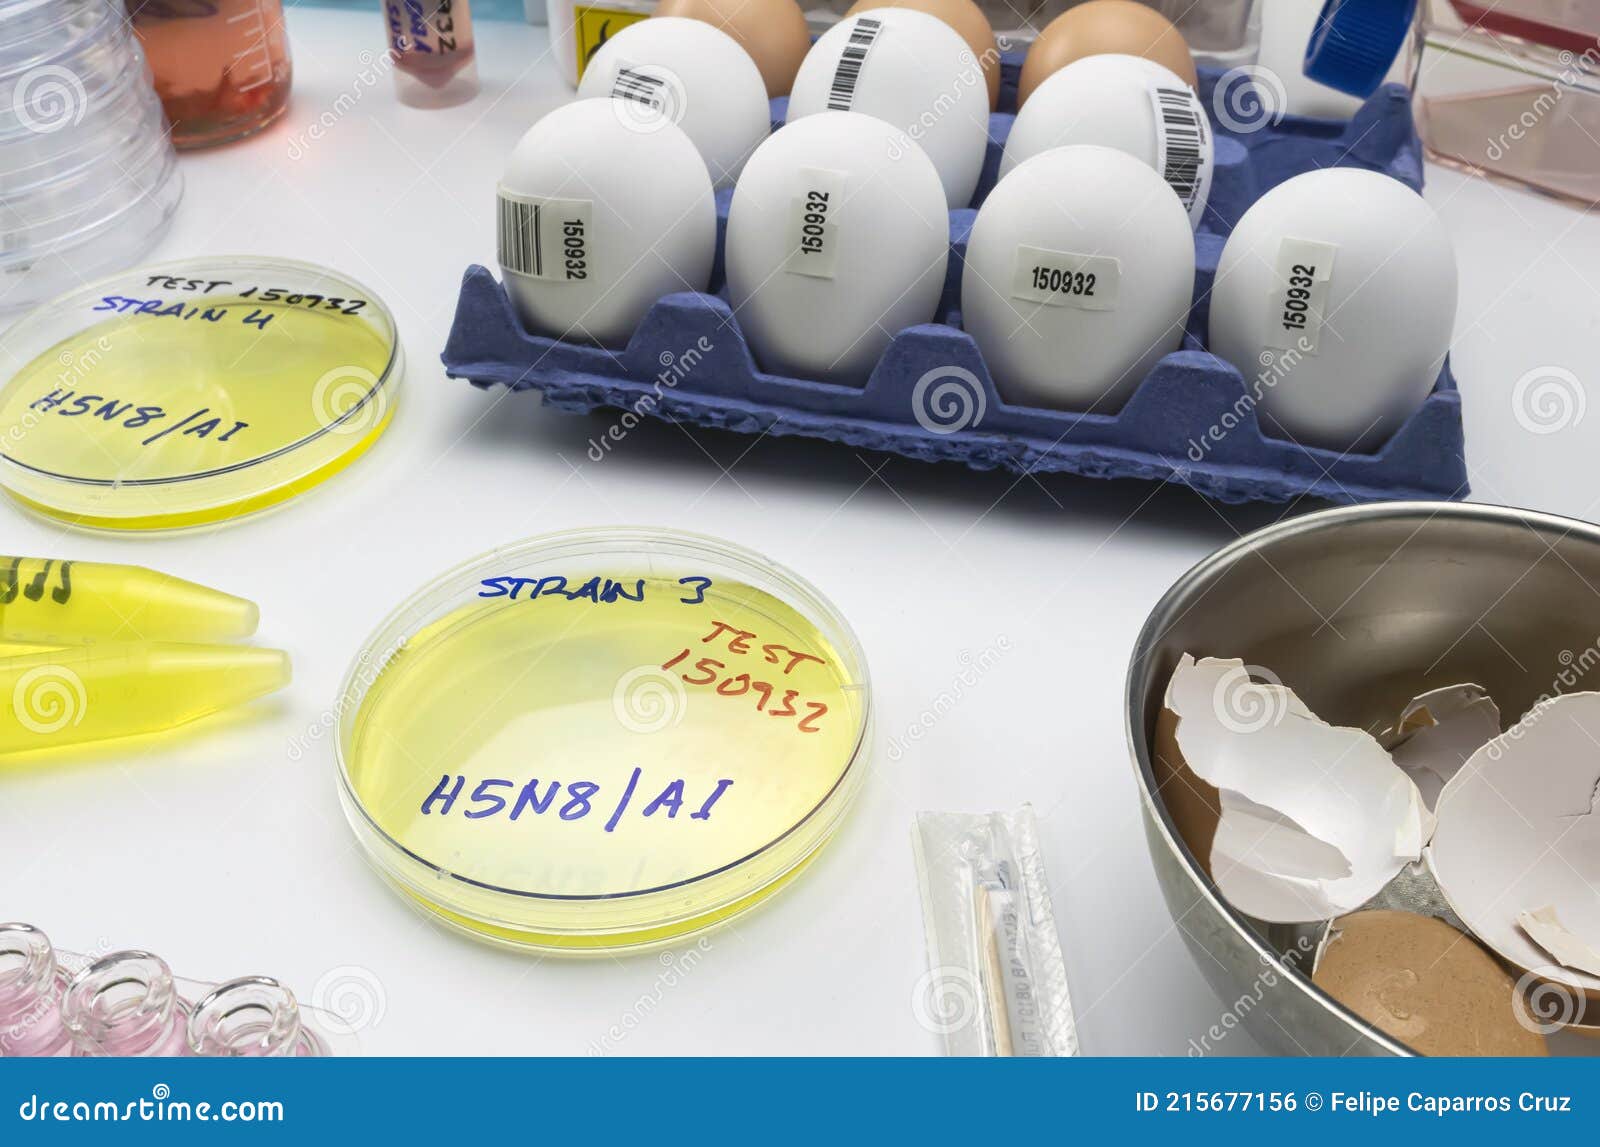 new strain of h5n8 avian influenza infected in humans, petri dish with samples